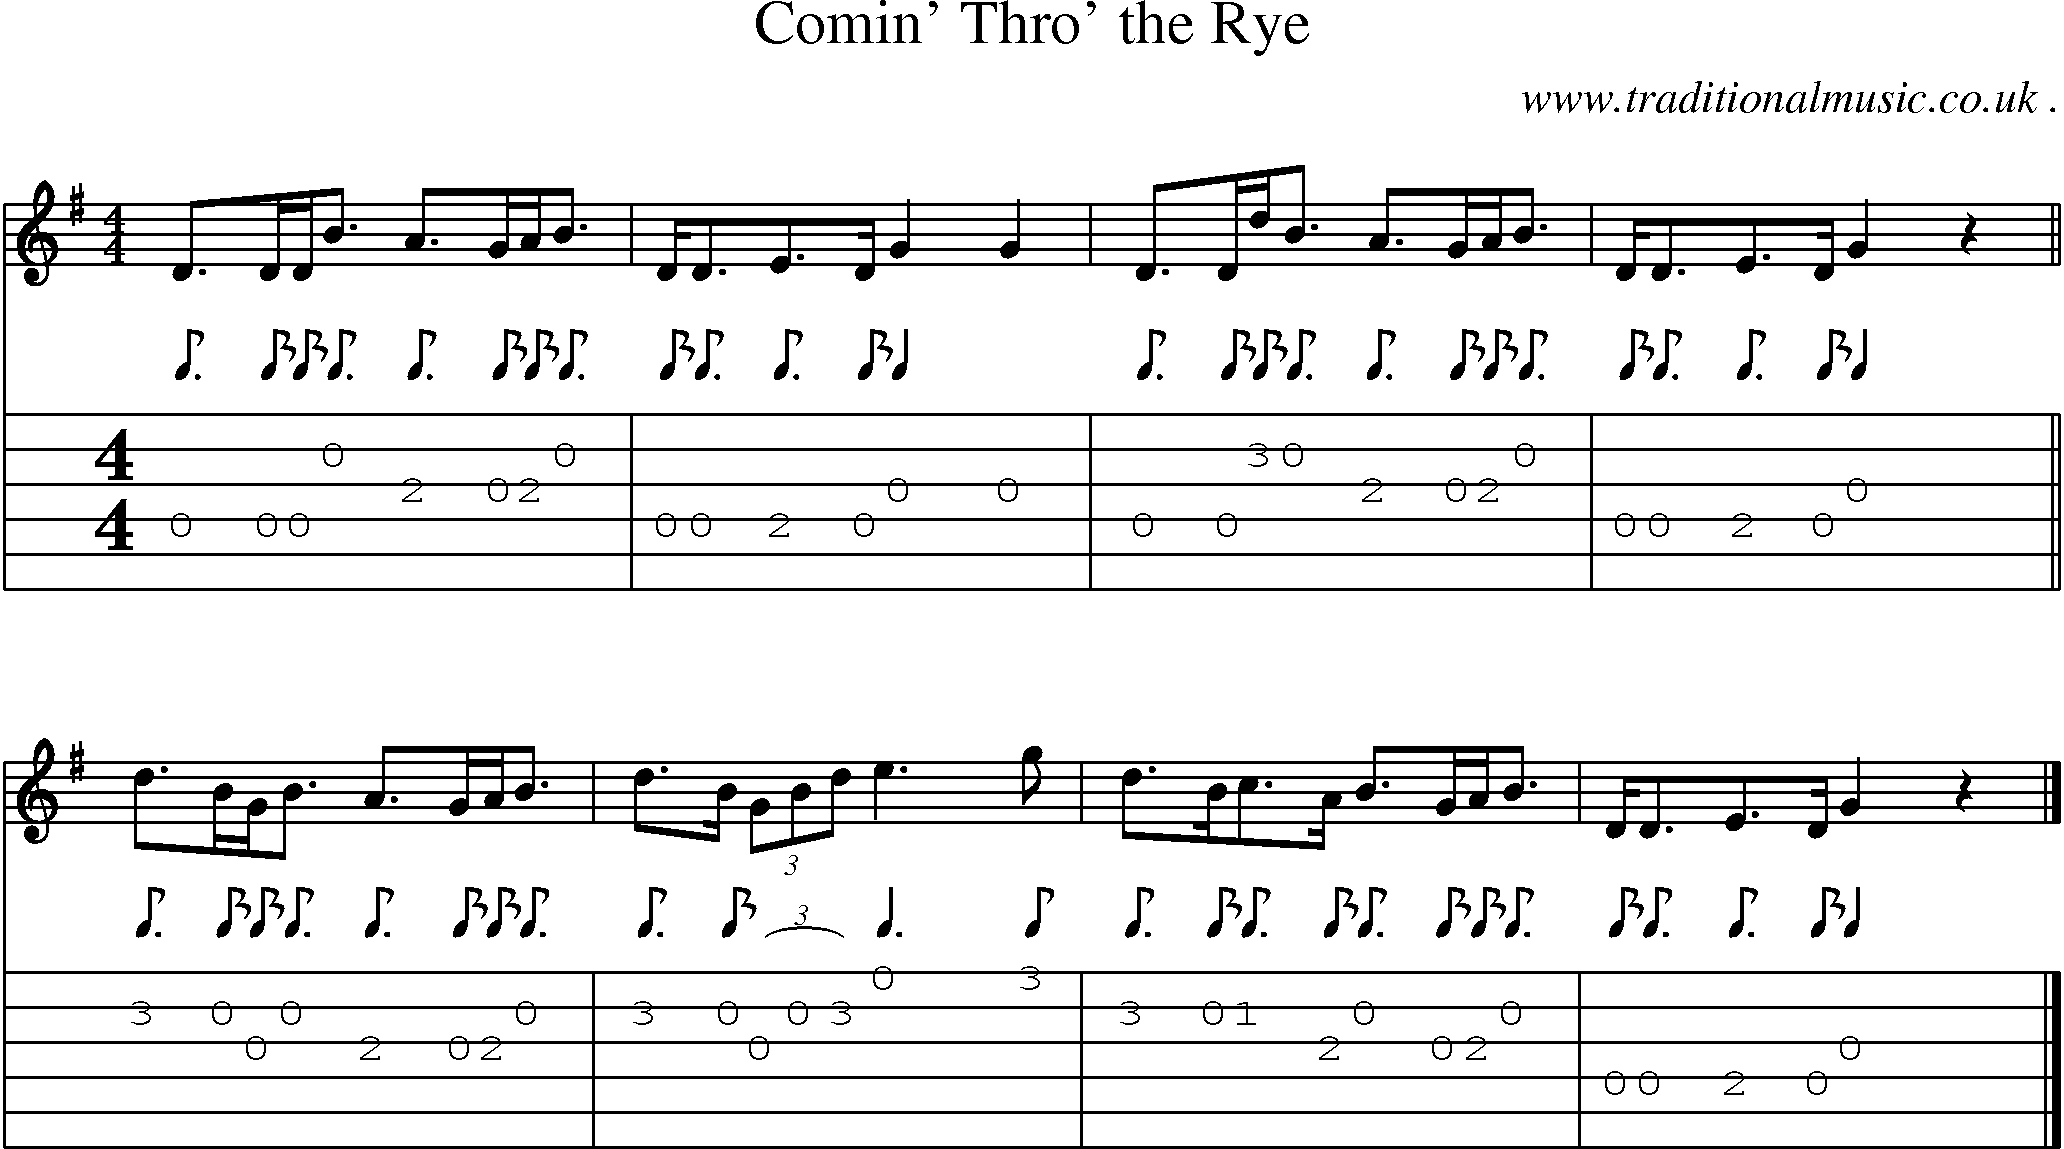 Sheet-music  score, Chords and Guitar Tabs for Comin Thro The Rye